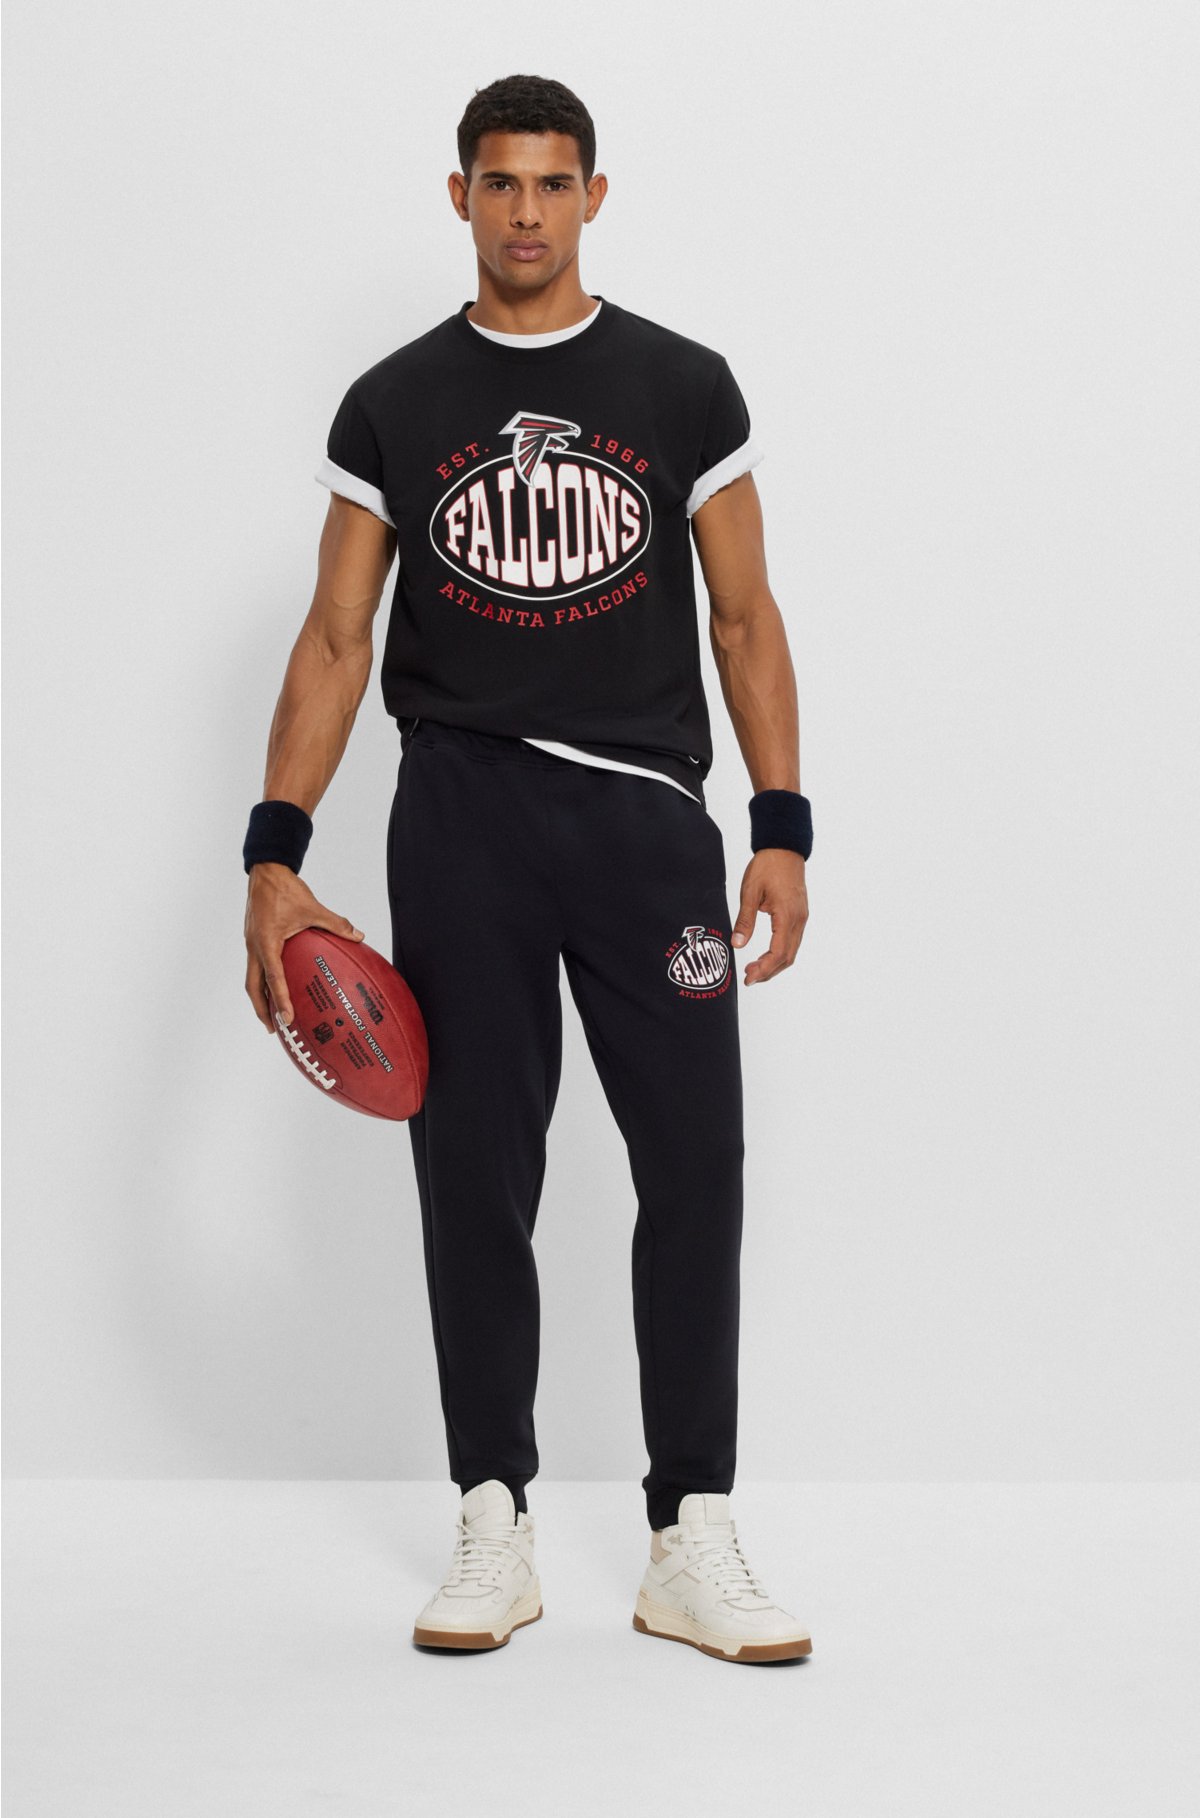  BOSS x NFL stretch-cotton T-shirt with collaborative branding, Falcons